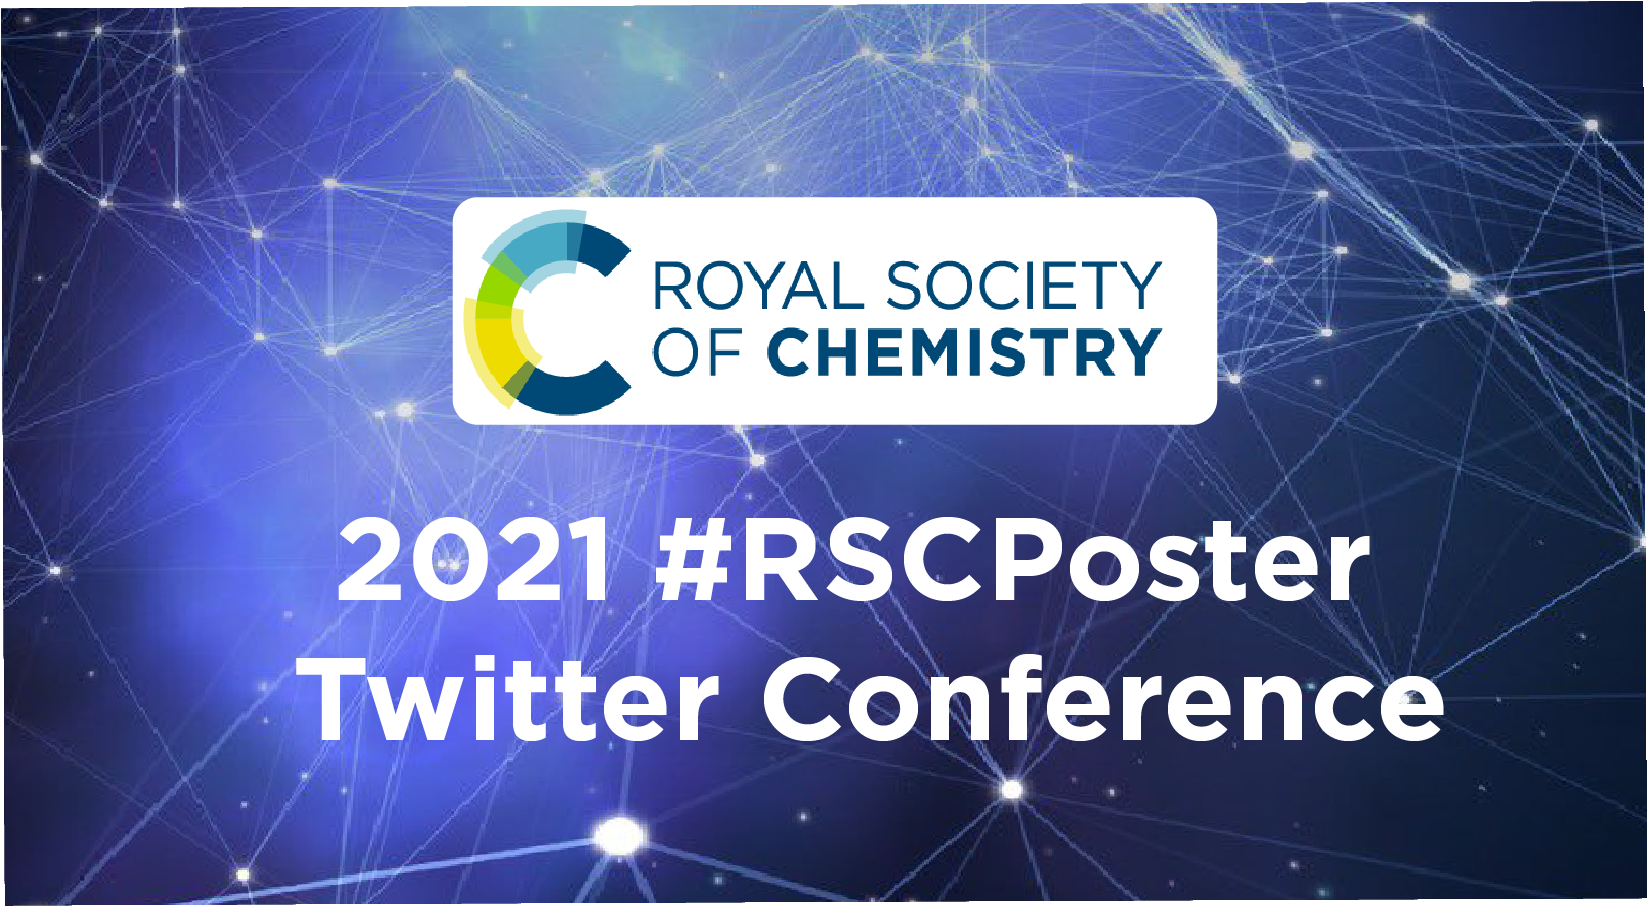 RSC Poster Conference 2021